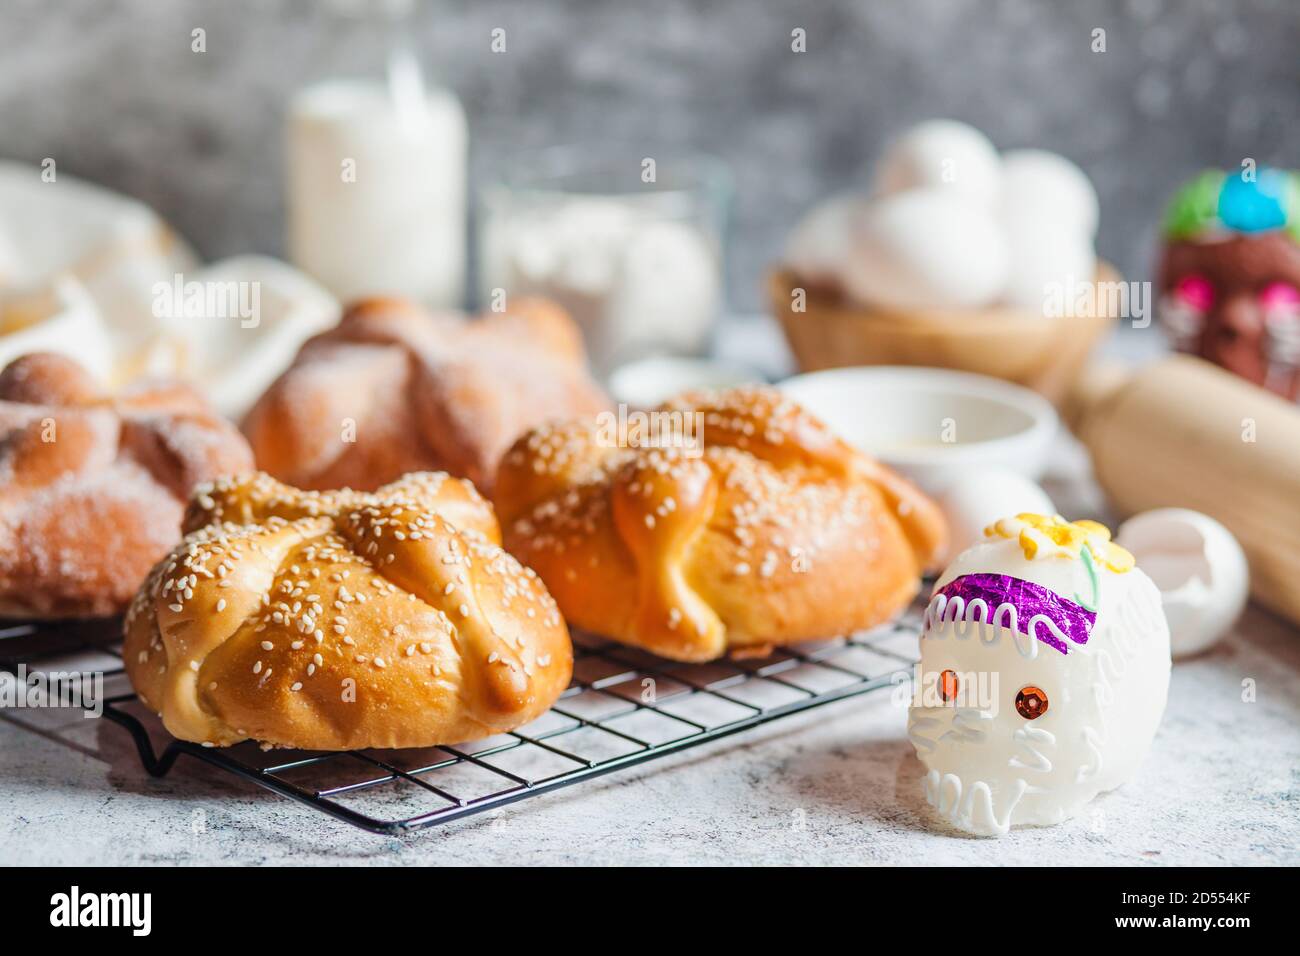 Pan de Muerto, ingredients for Mexican bread recipe traditional for day of the Dead in Mexico Stock Photo